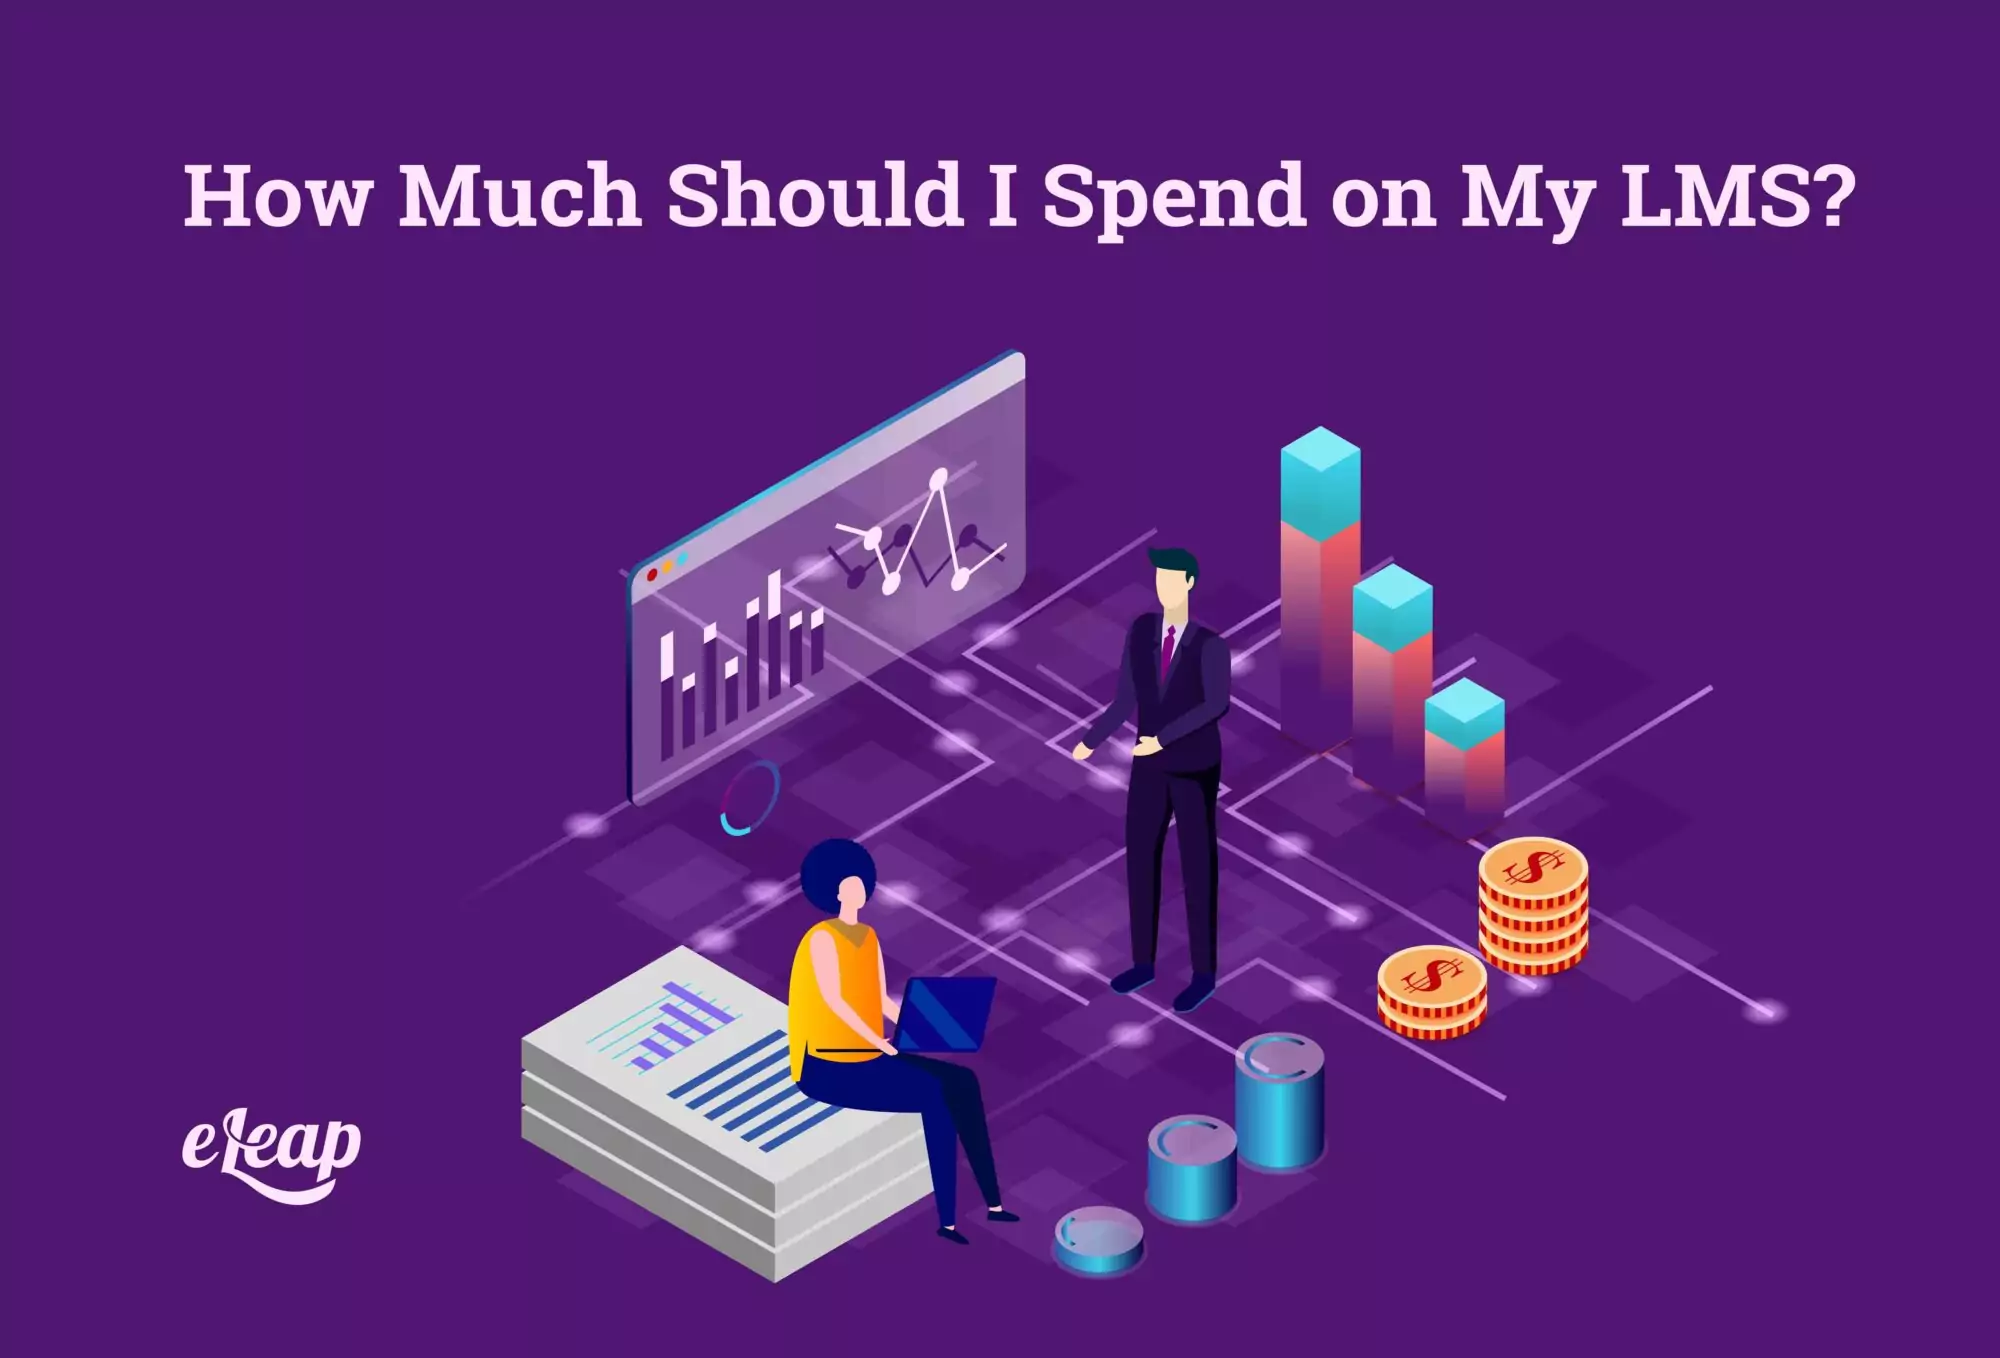 How Much Should I Spend on My LMS?